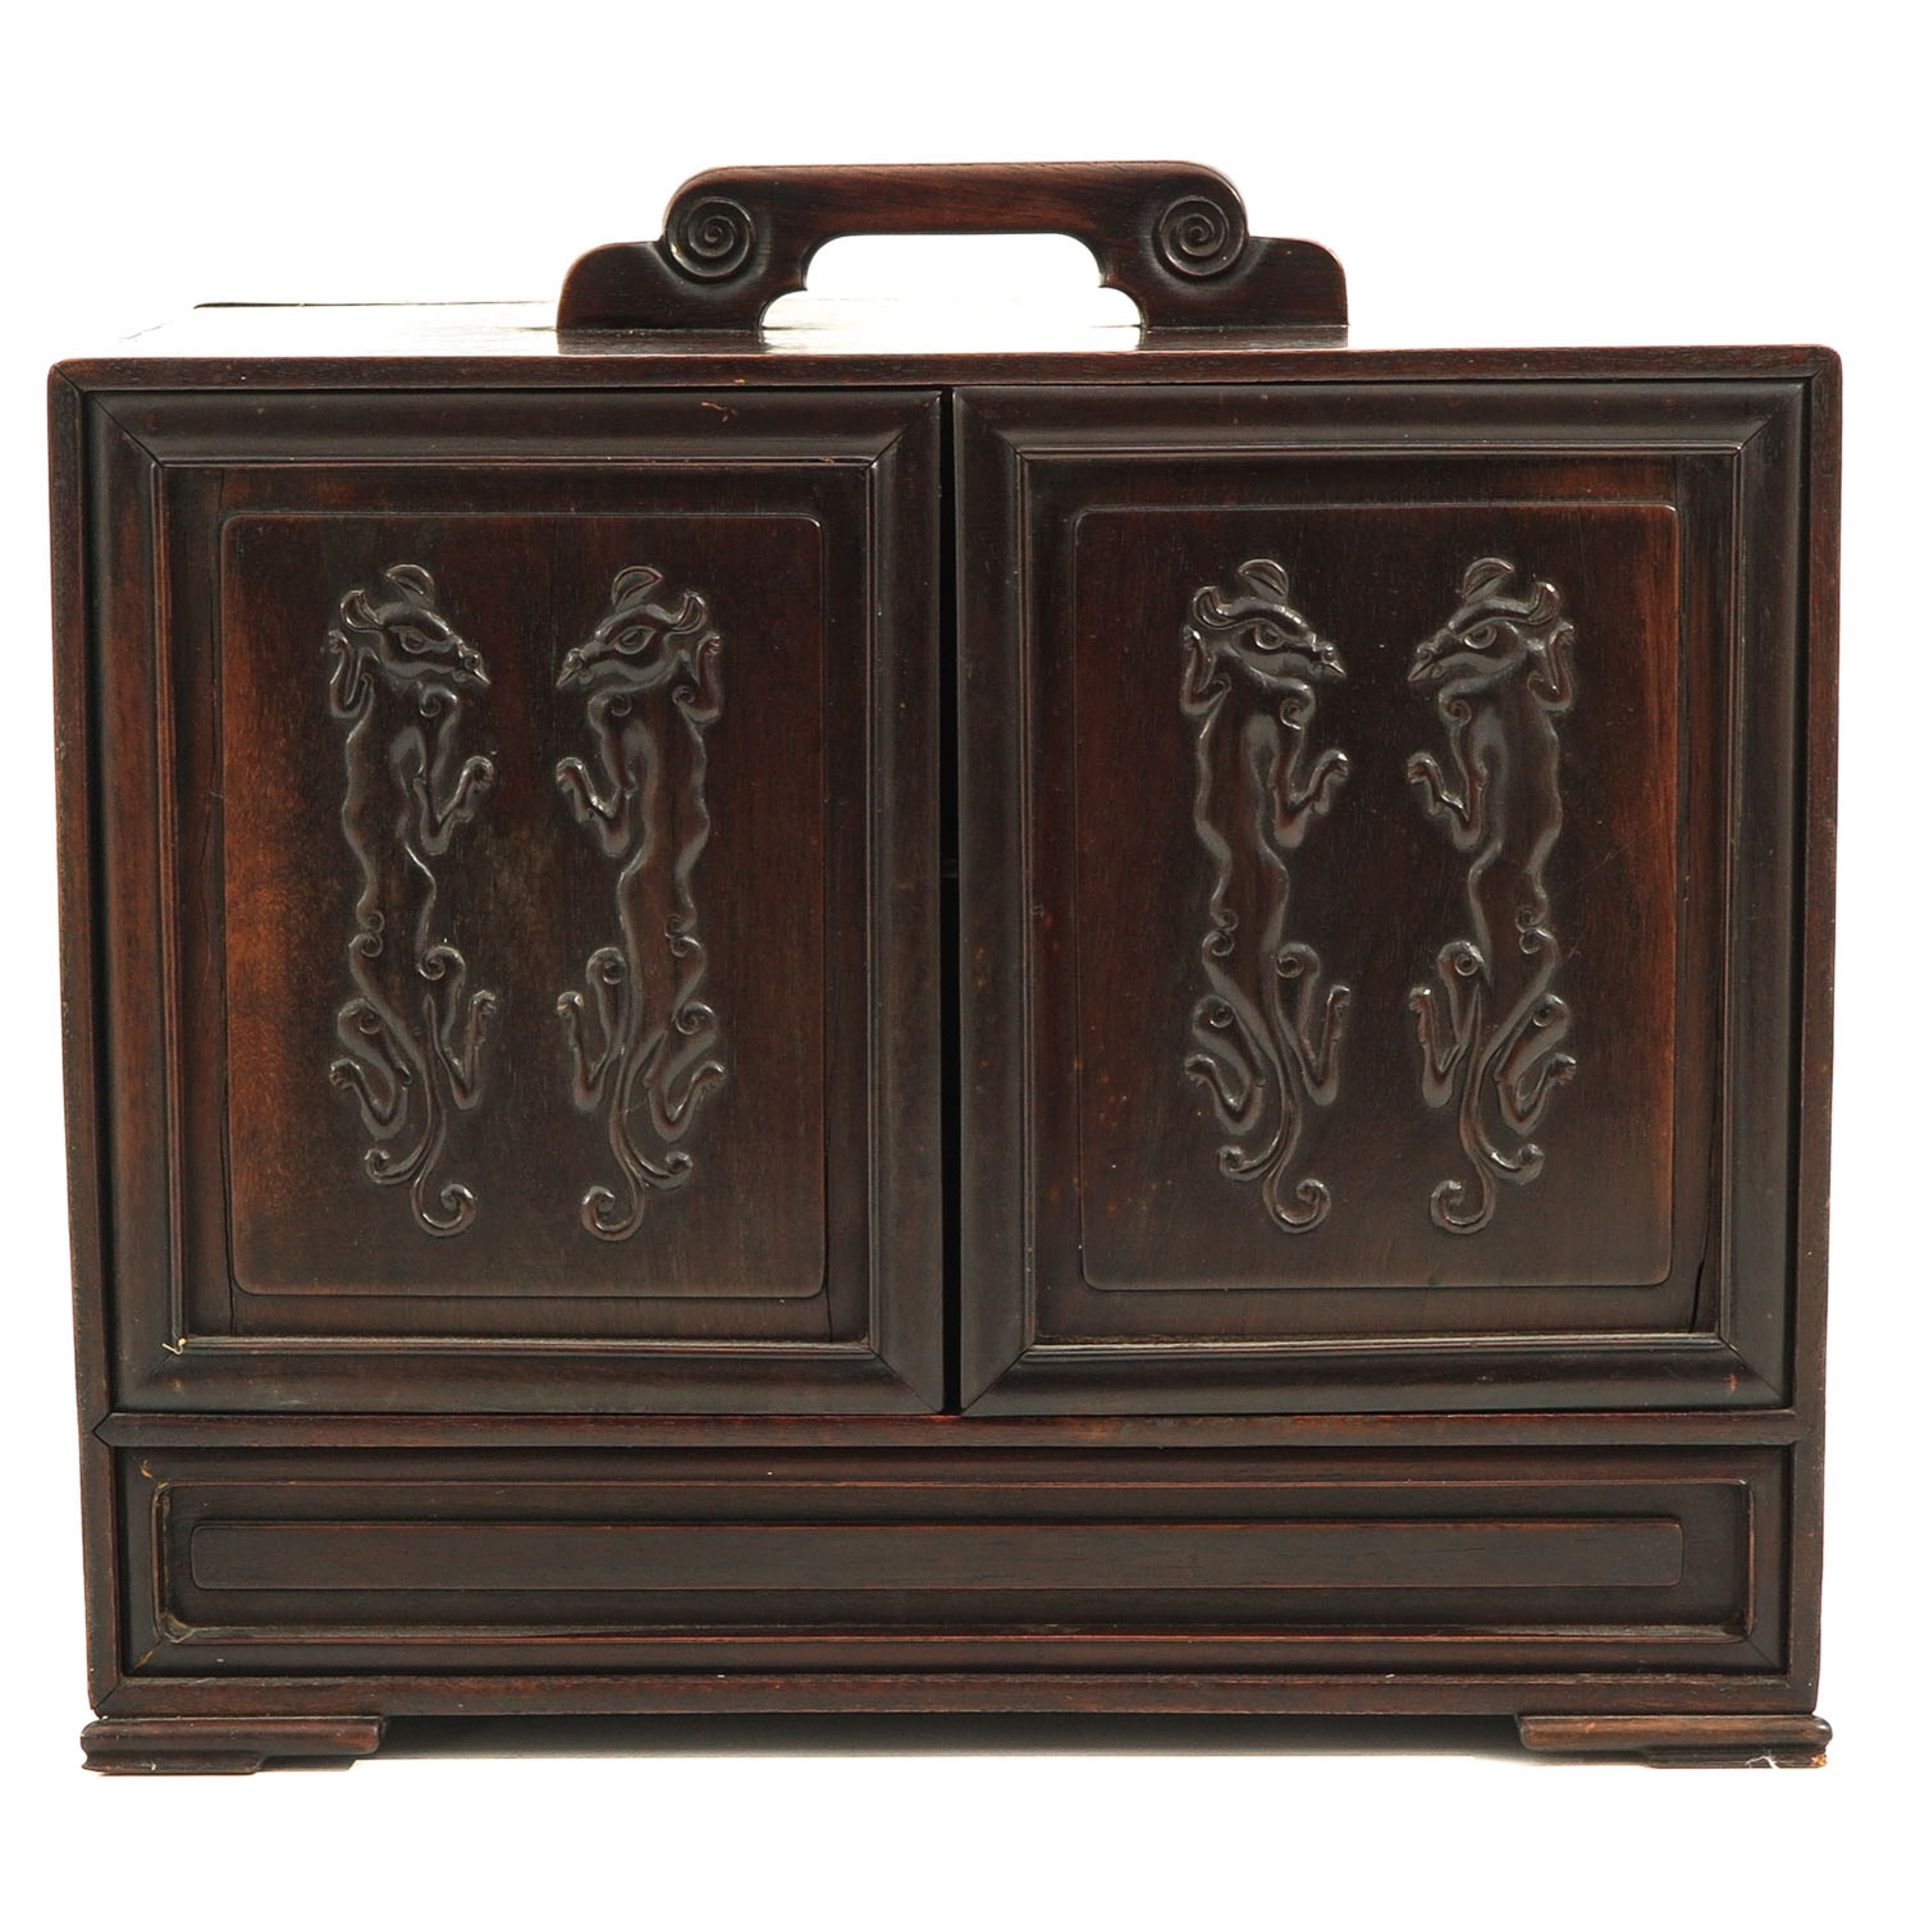 A Chinese Carved Wood Cabinet